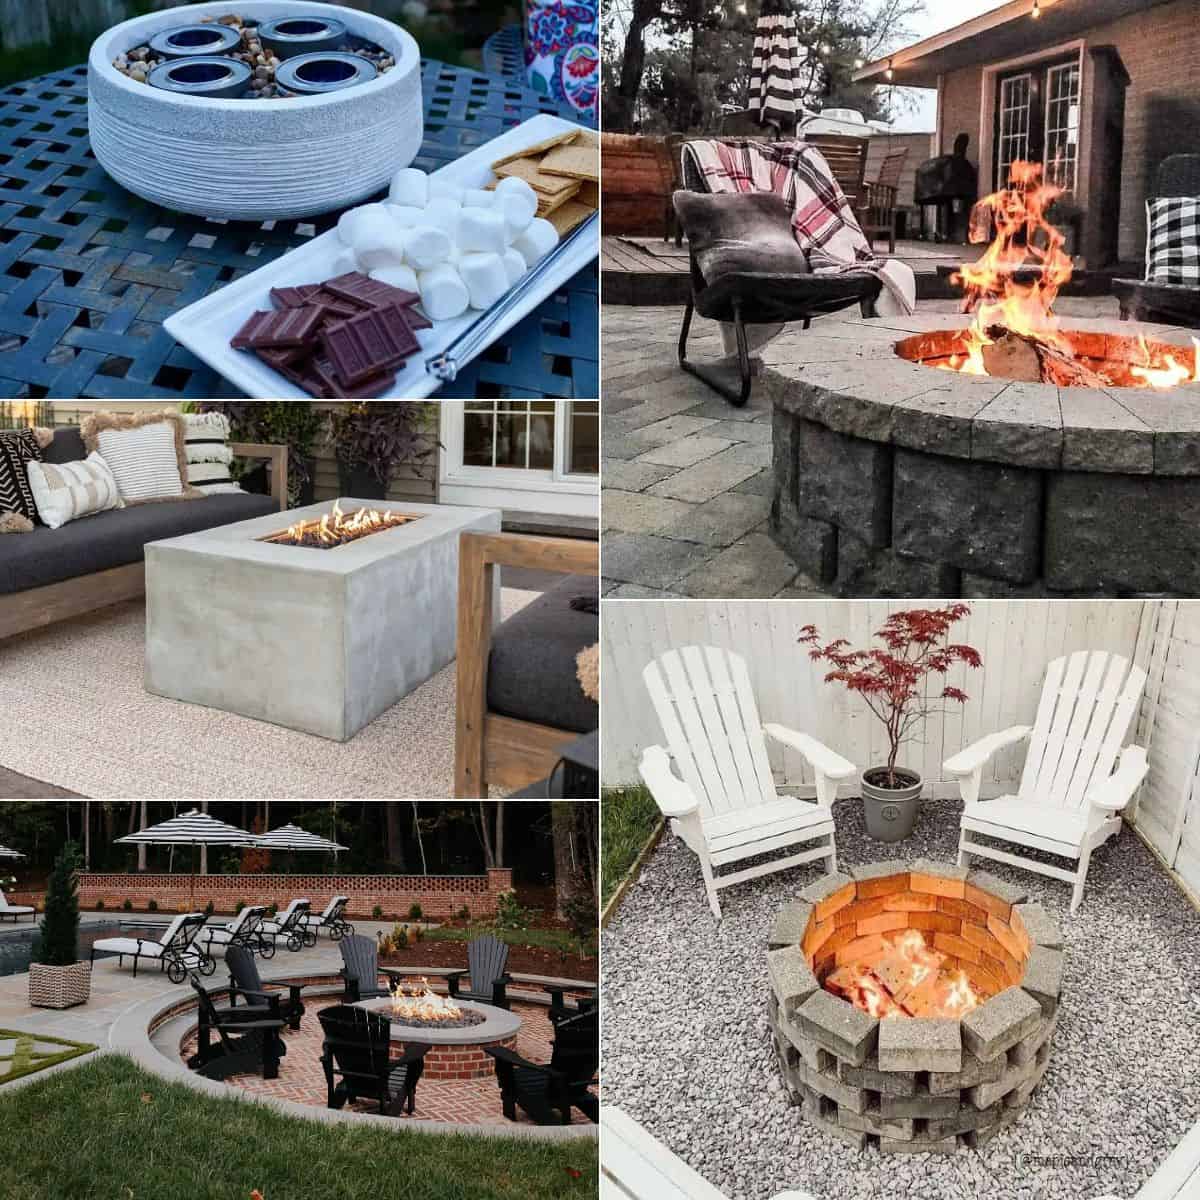 DIY-Concrete-Coffee-Table-Drink-Cooler-Fire-Pit-18 - DIY Huntress